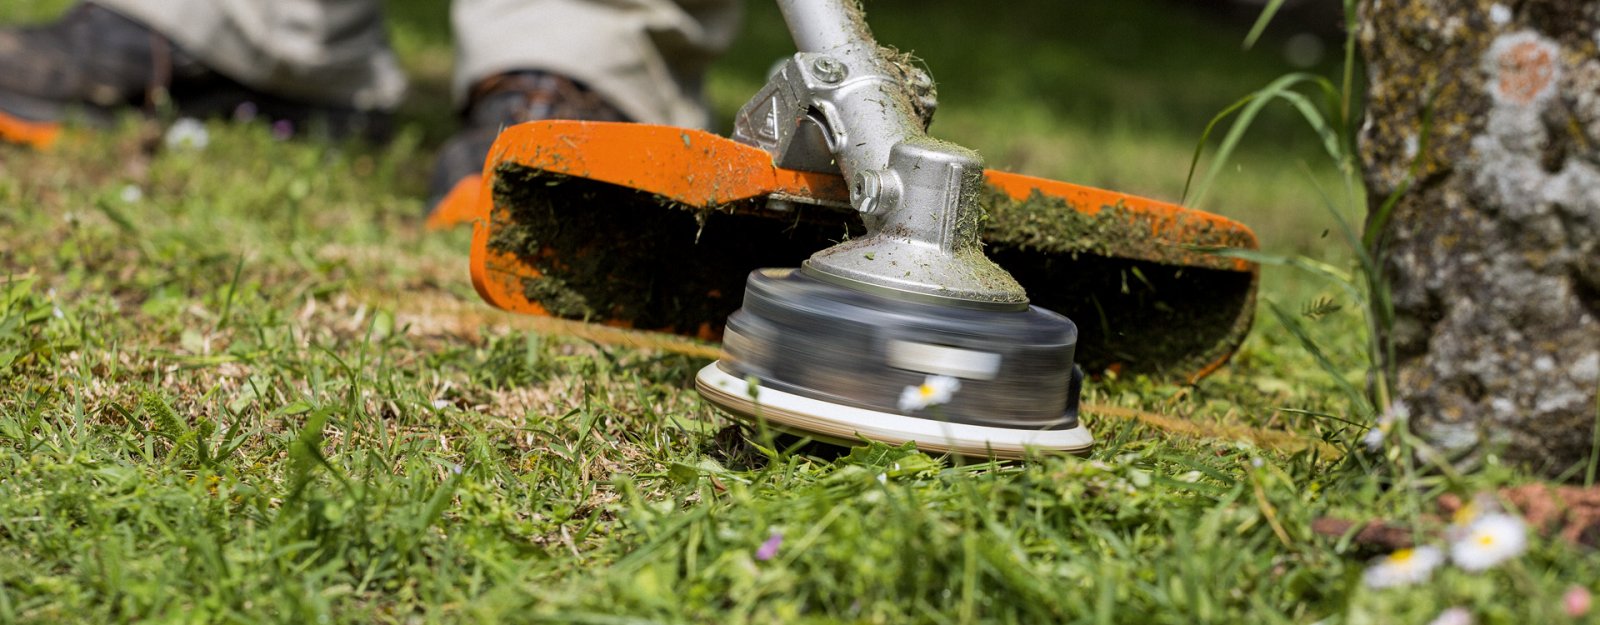 Stihl Brushcutters - A Balmers GM Buyers Guide